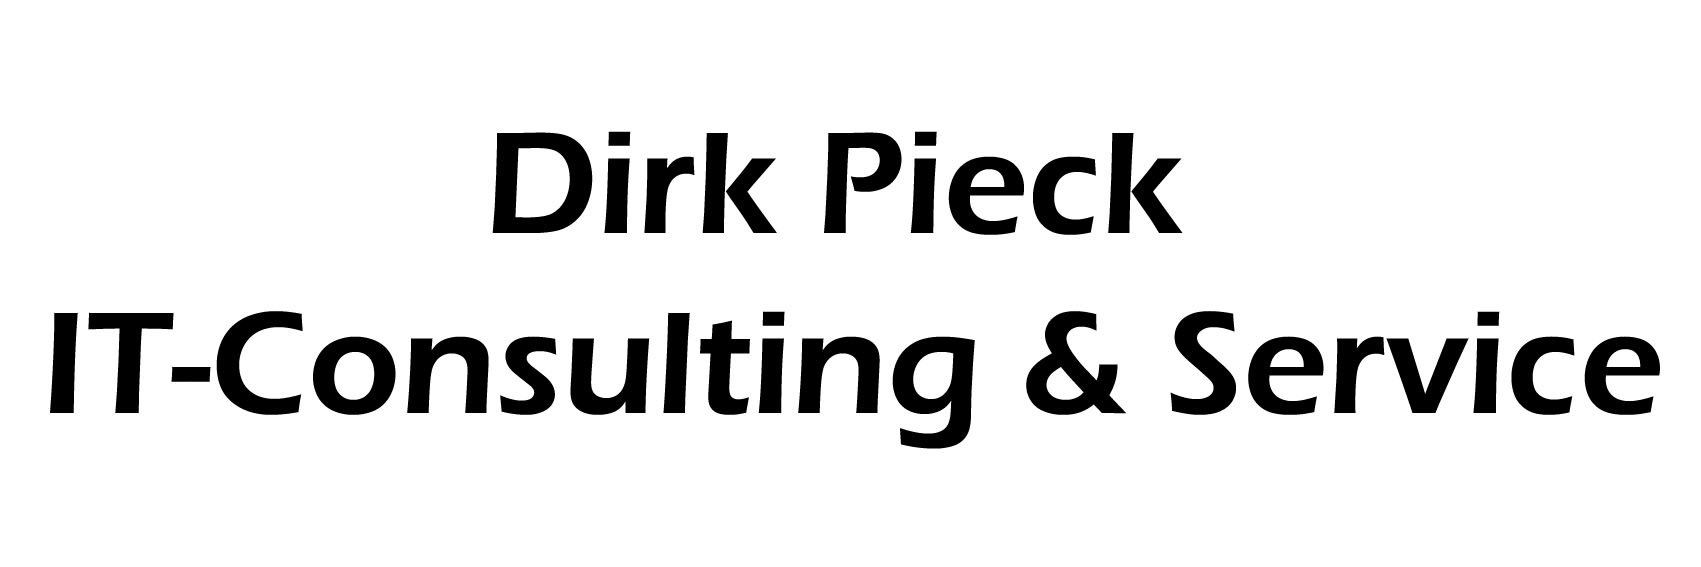 Dirk Pieck IT-Consulting & Service